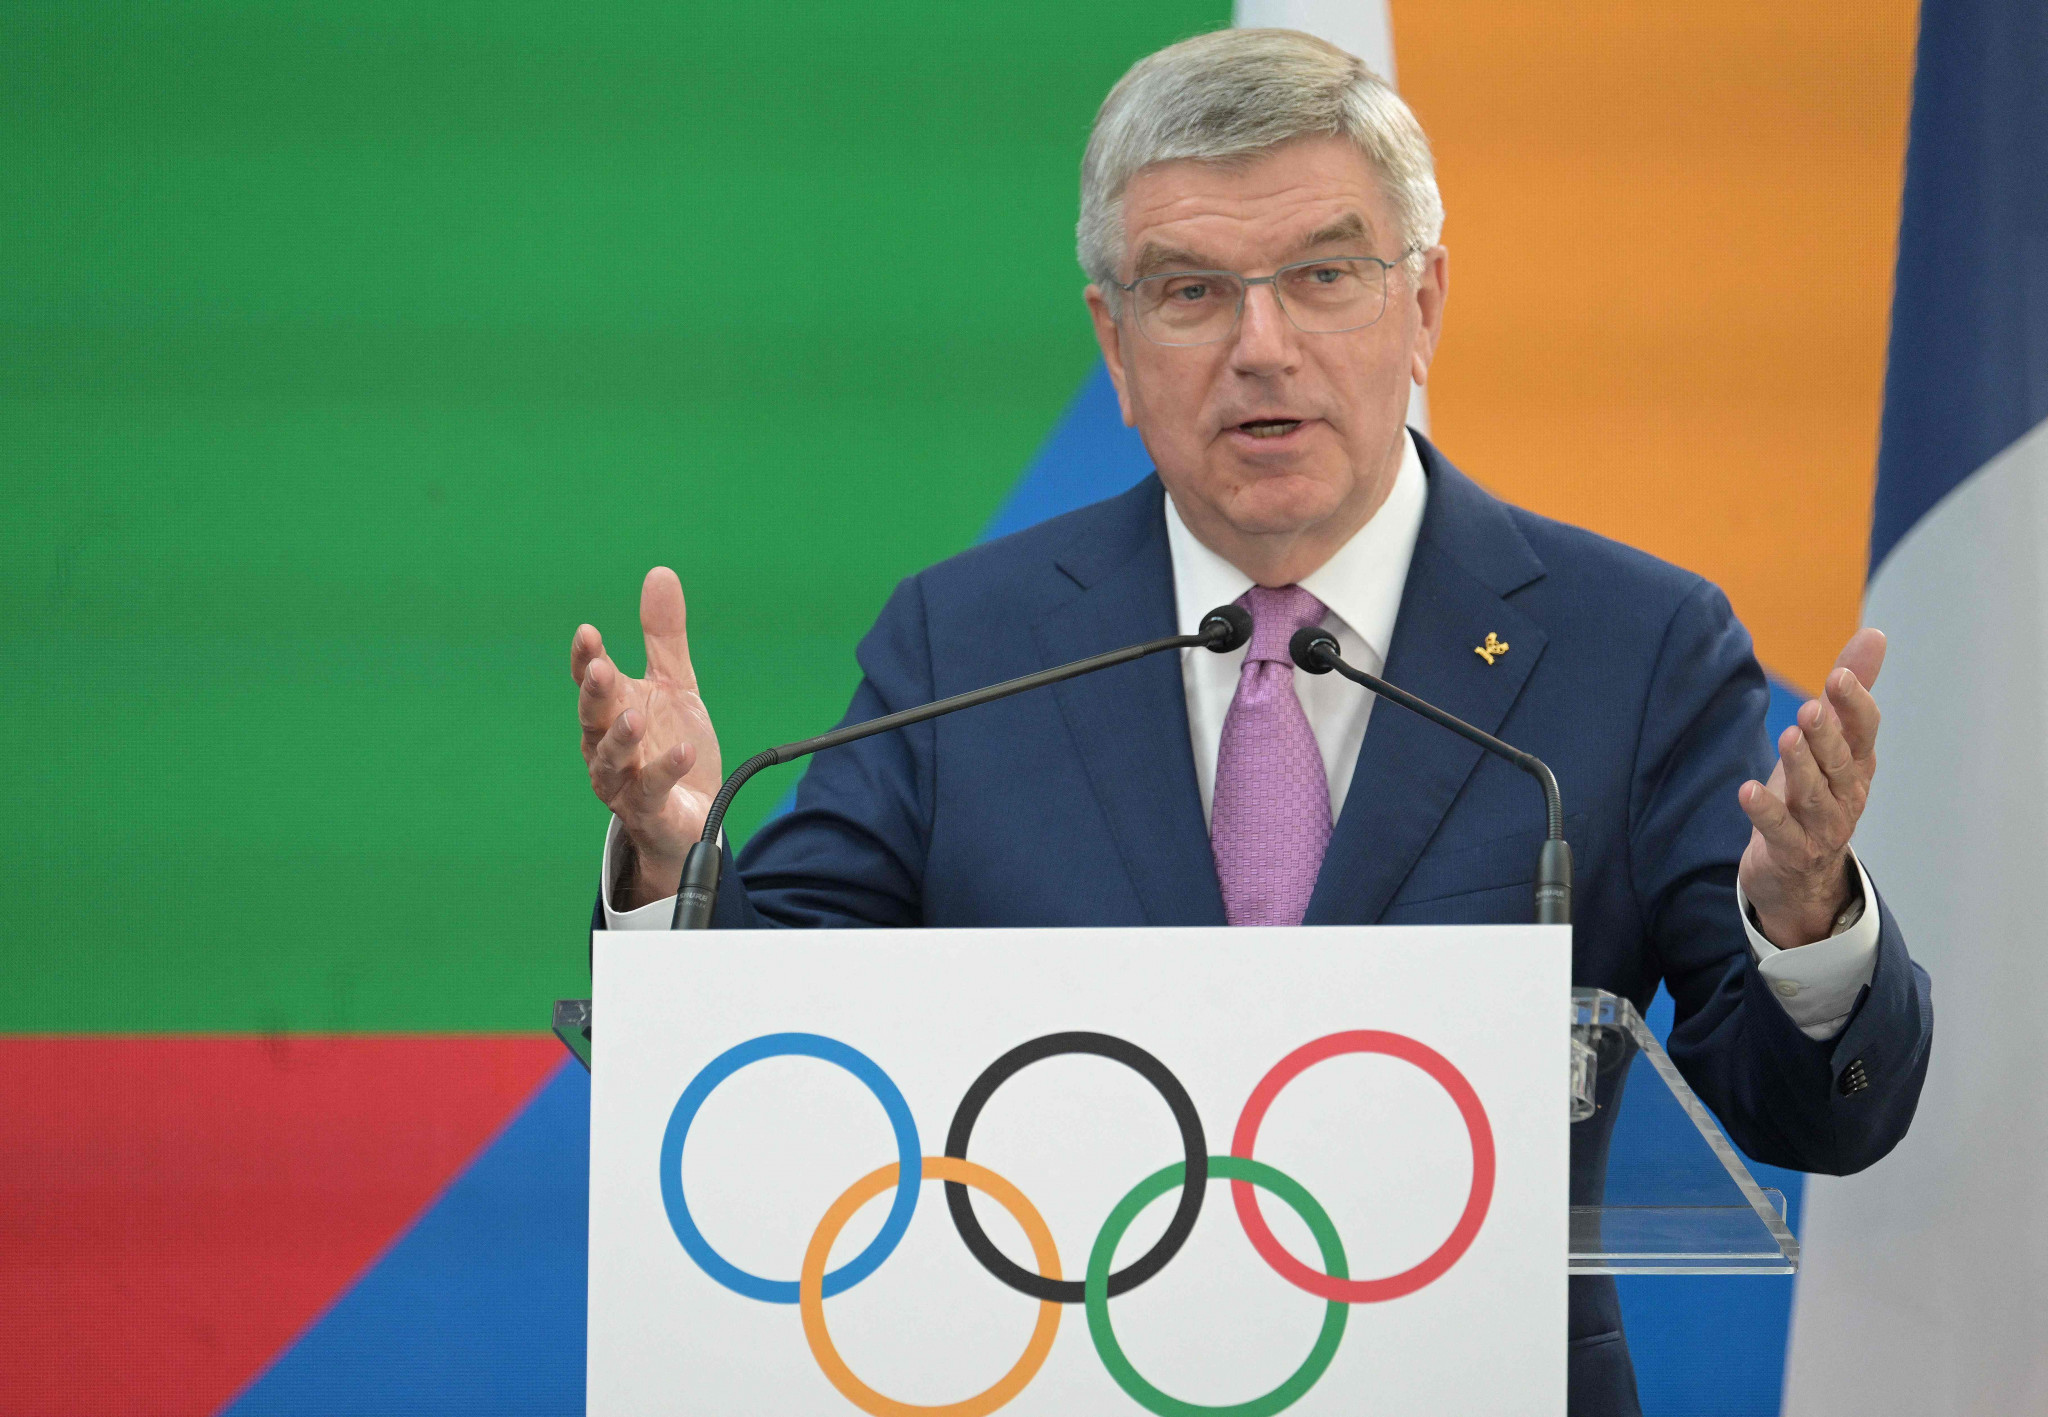 IOC President Bach invites 203 out of 206 NOCs to Paris 2024